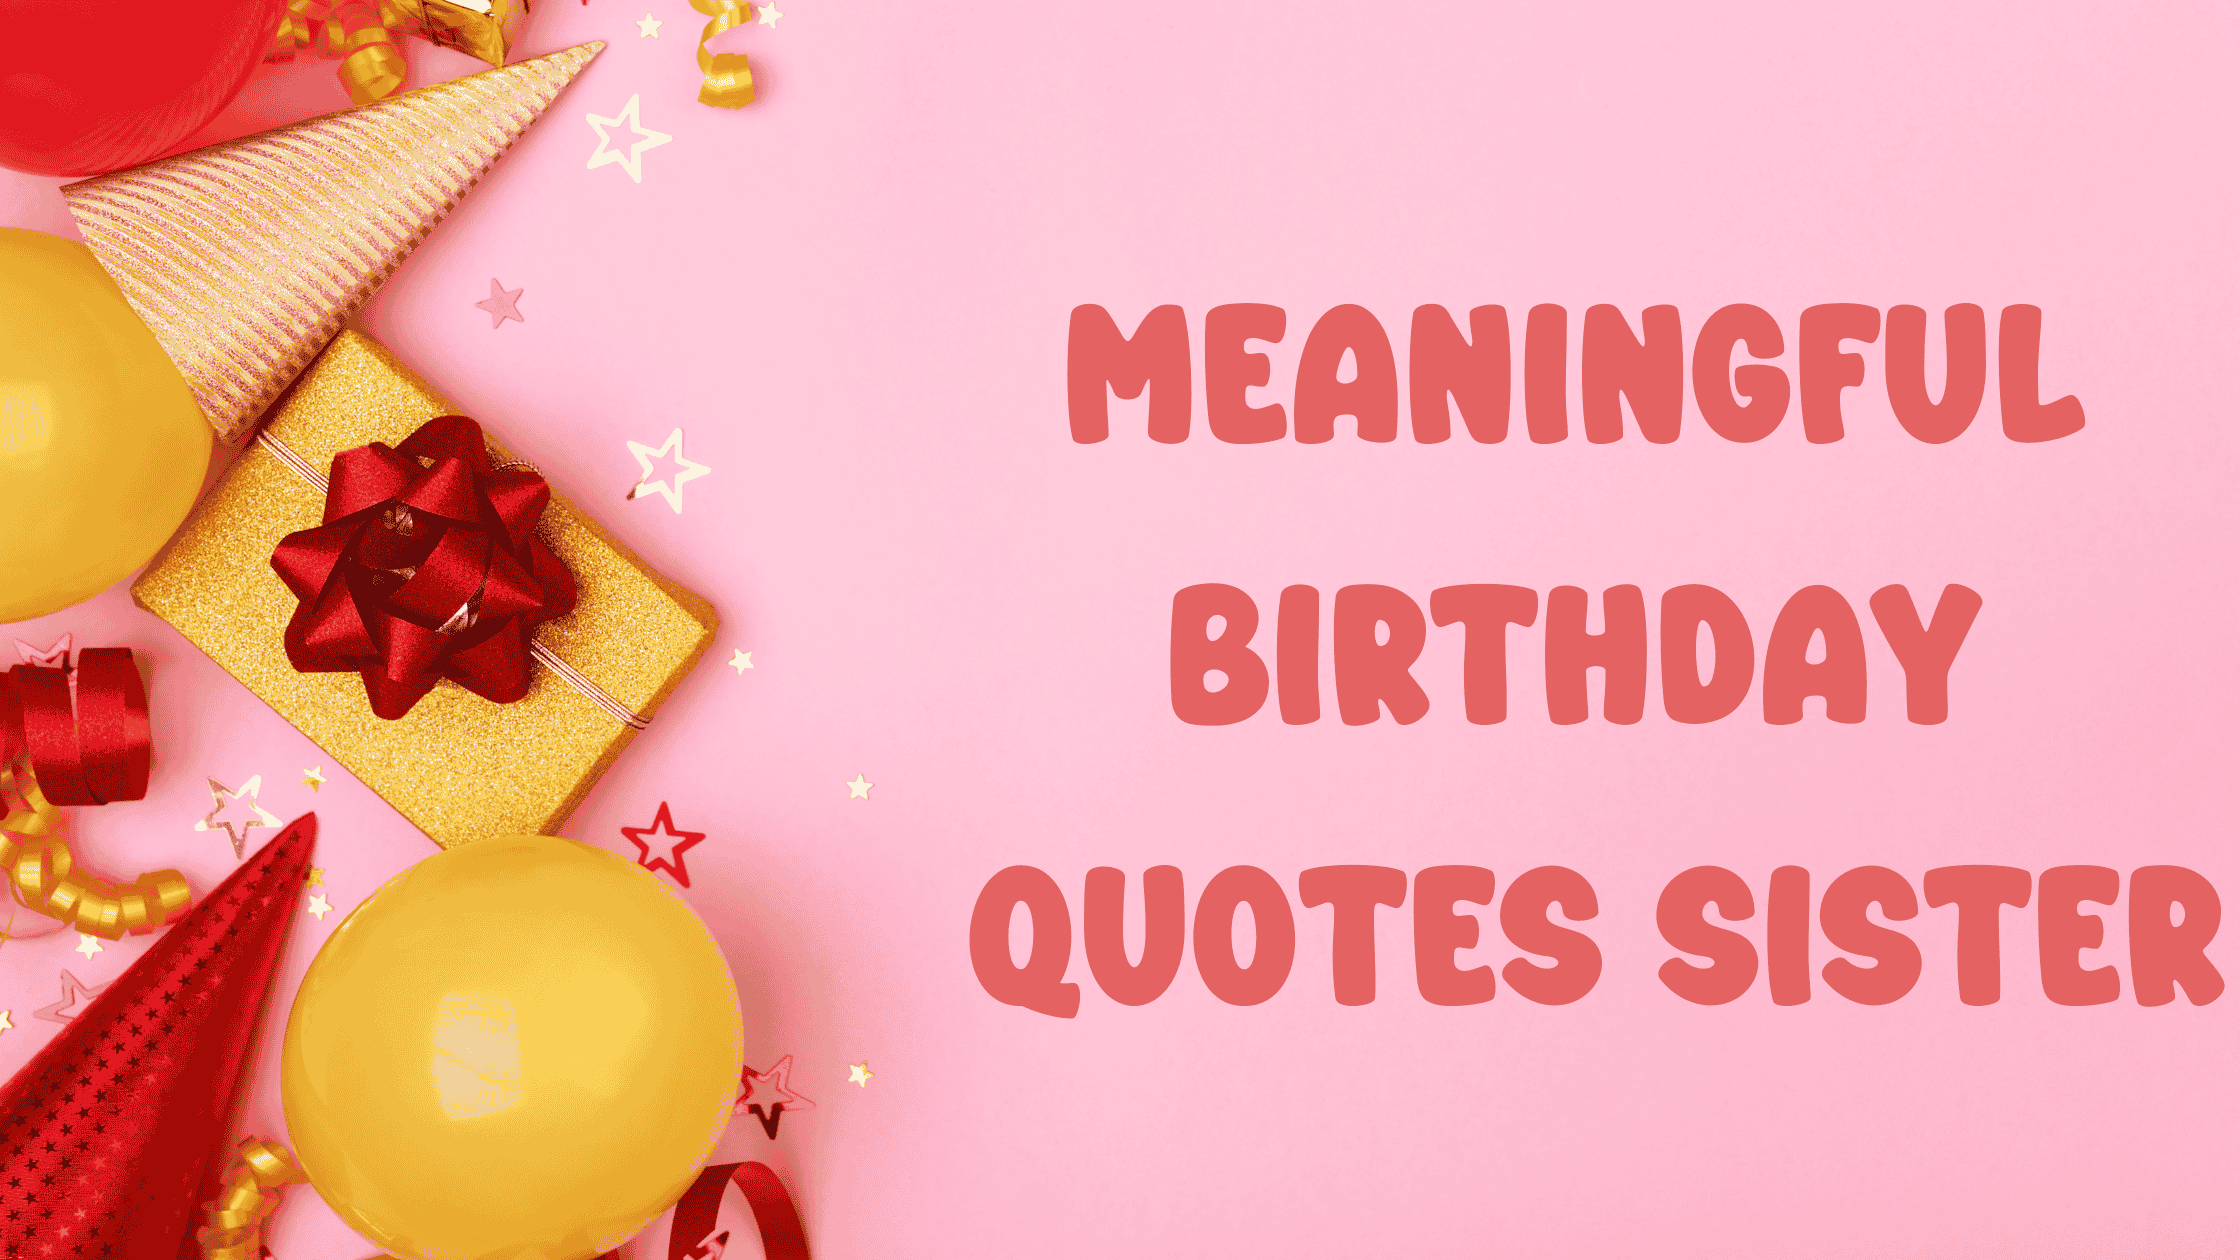 Meaningful Birthday Quotes Sister